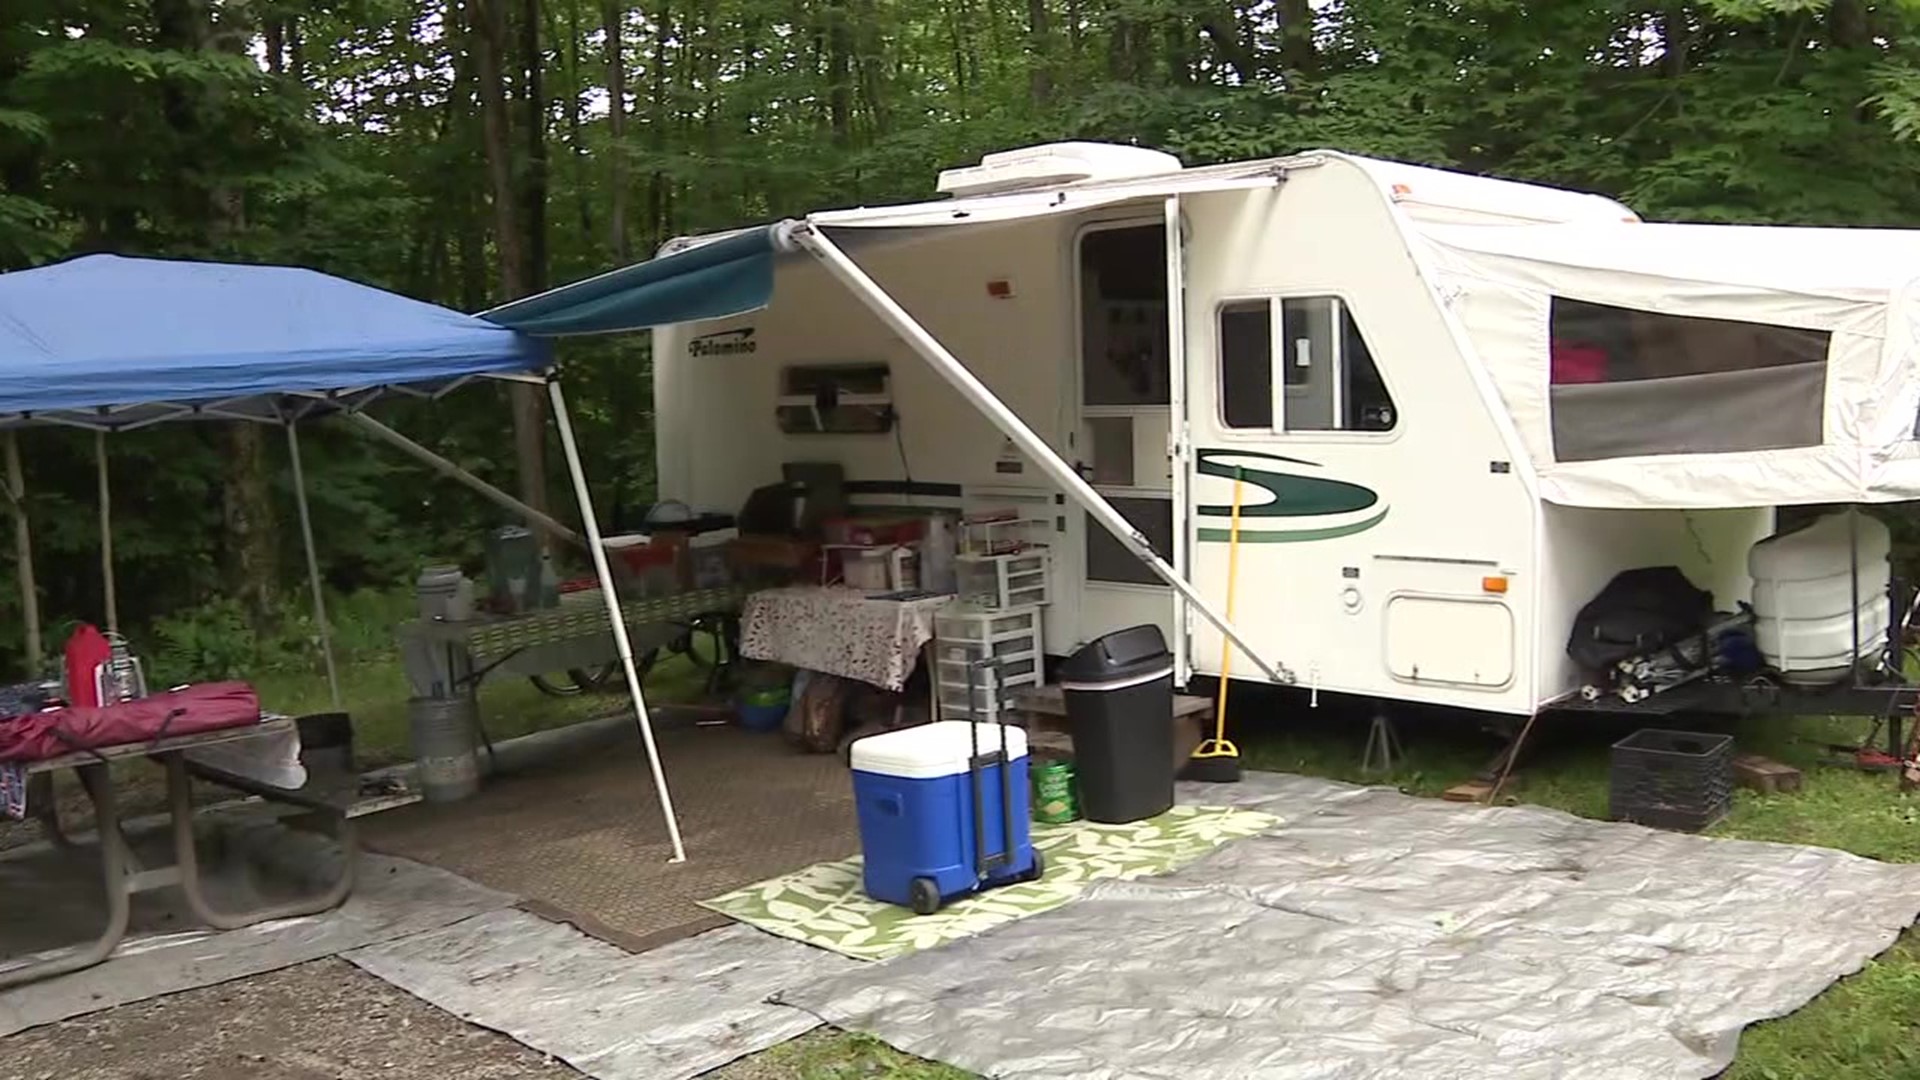 There will be no shortage of campers taking to the great outdoors this weekend in the Poconos.